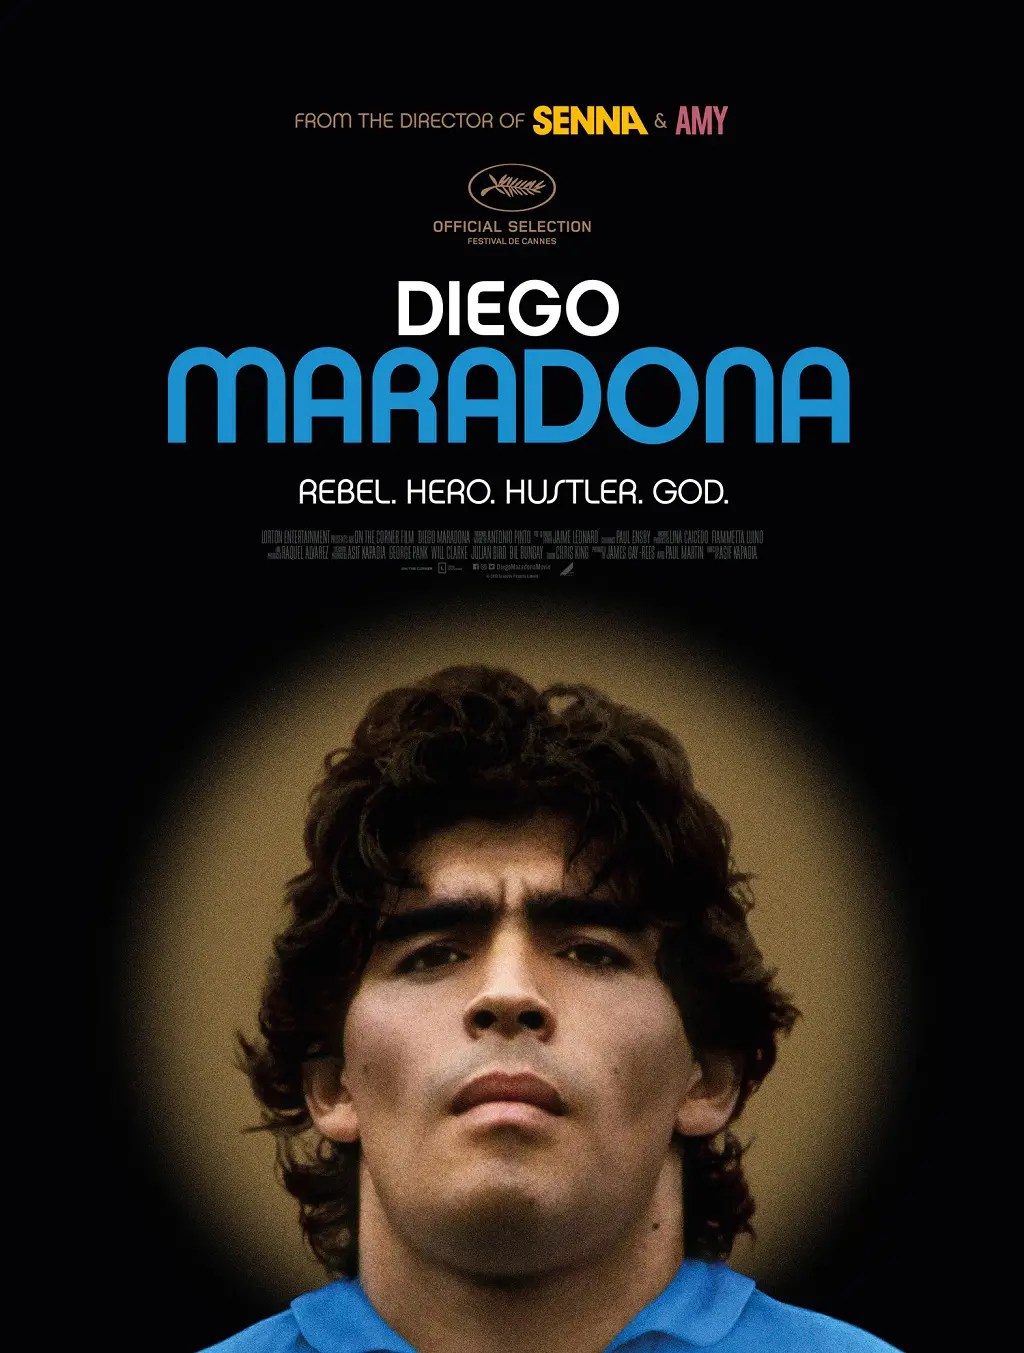 The movie is based on the story of Diego Maradona.